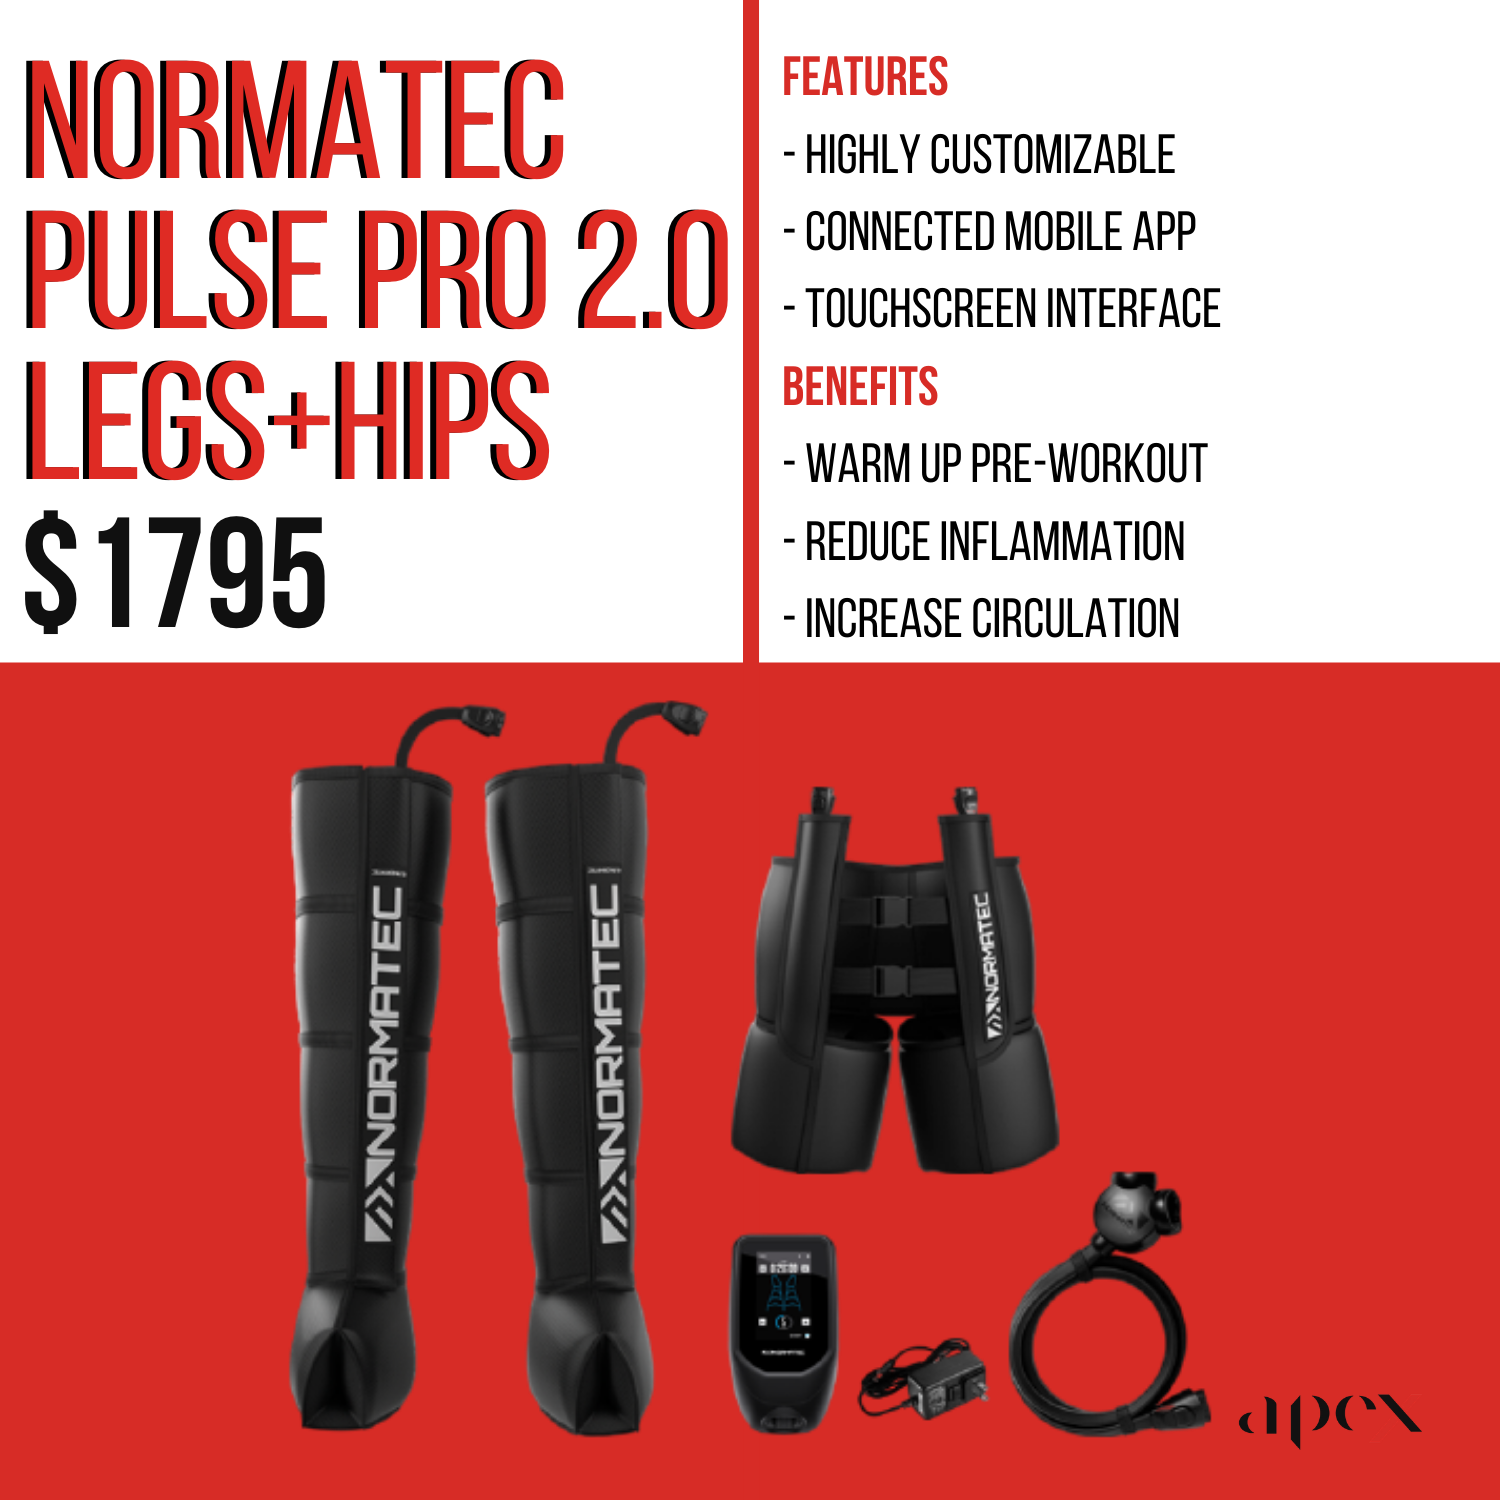 Normatec PulsePRO 2.0 Legs+Hips.png